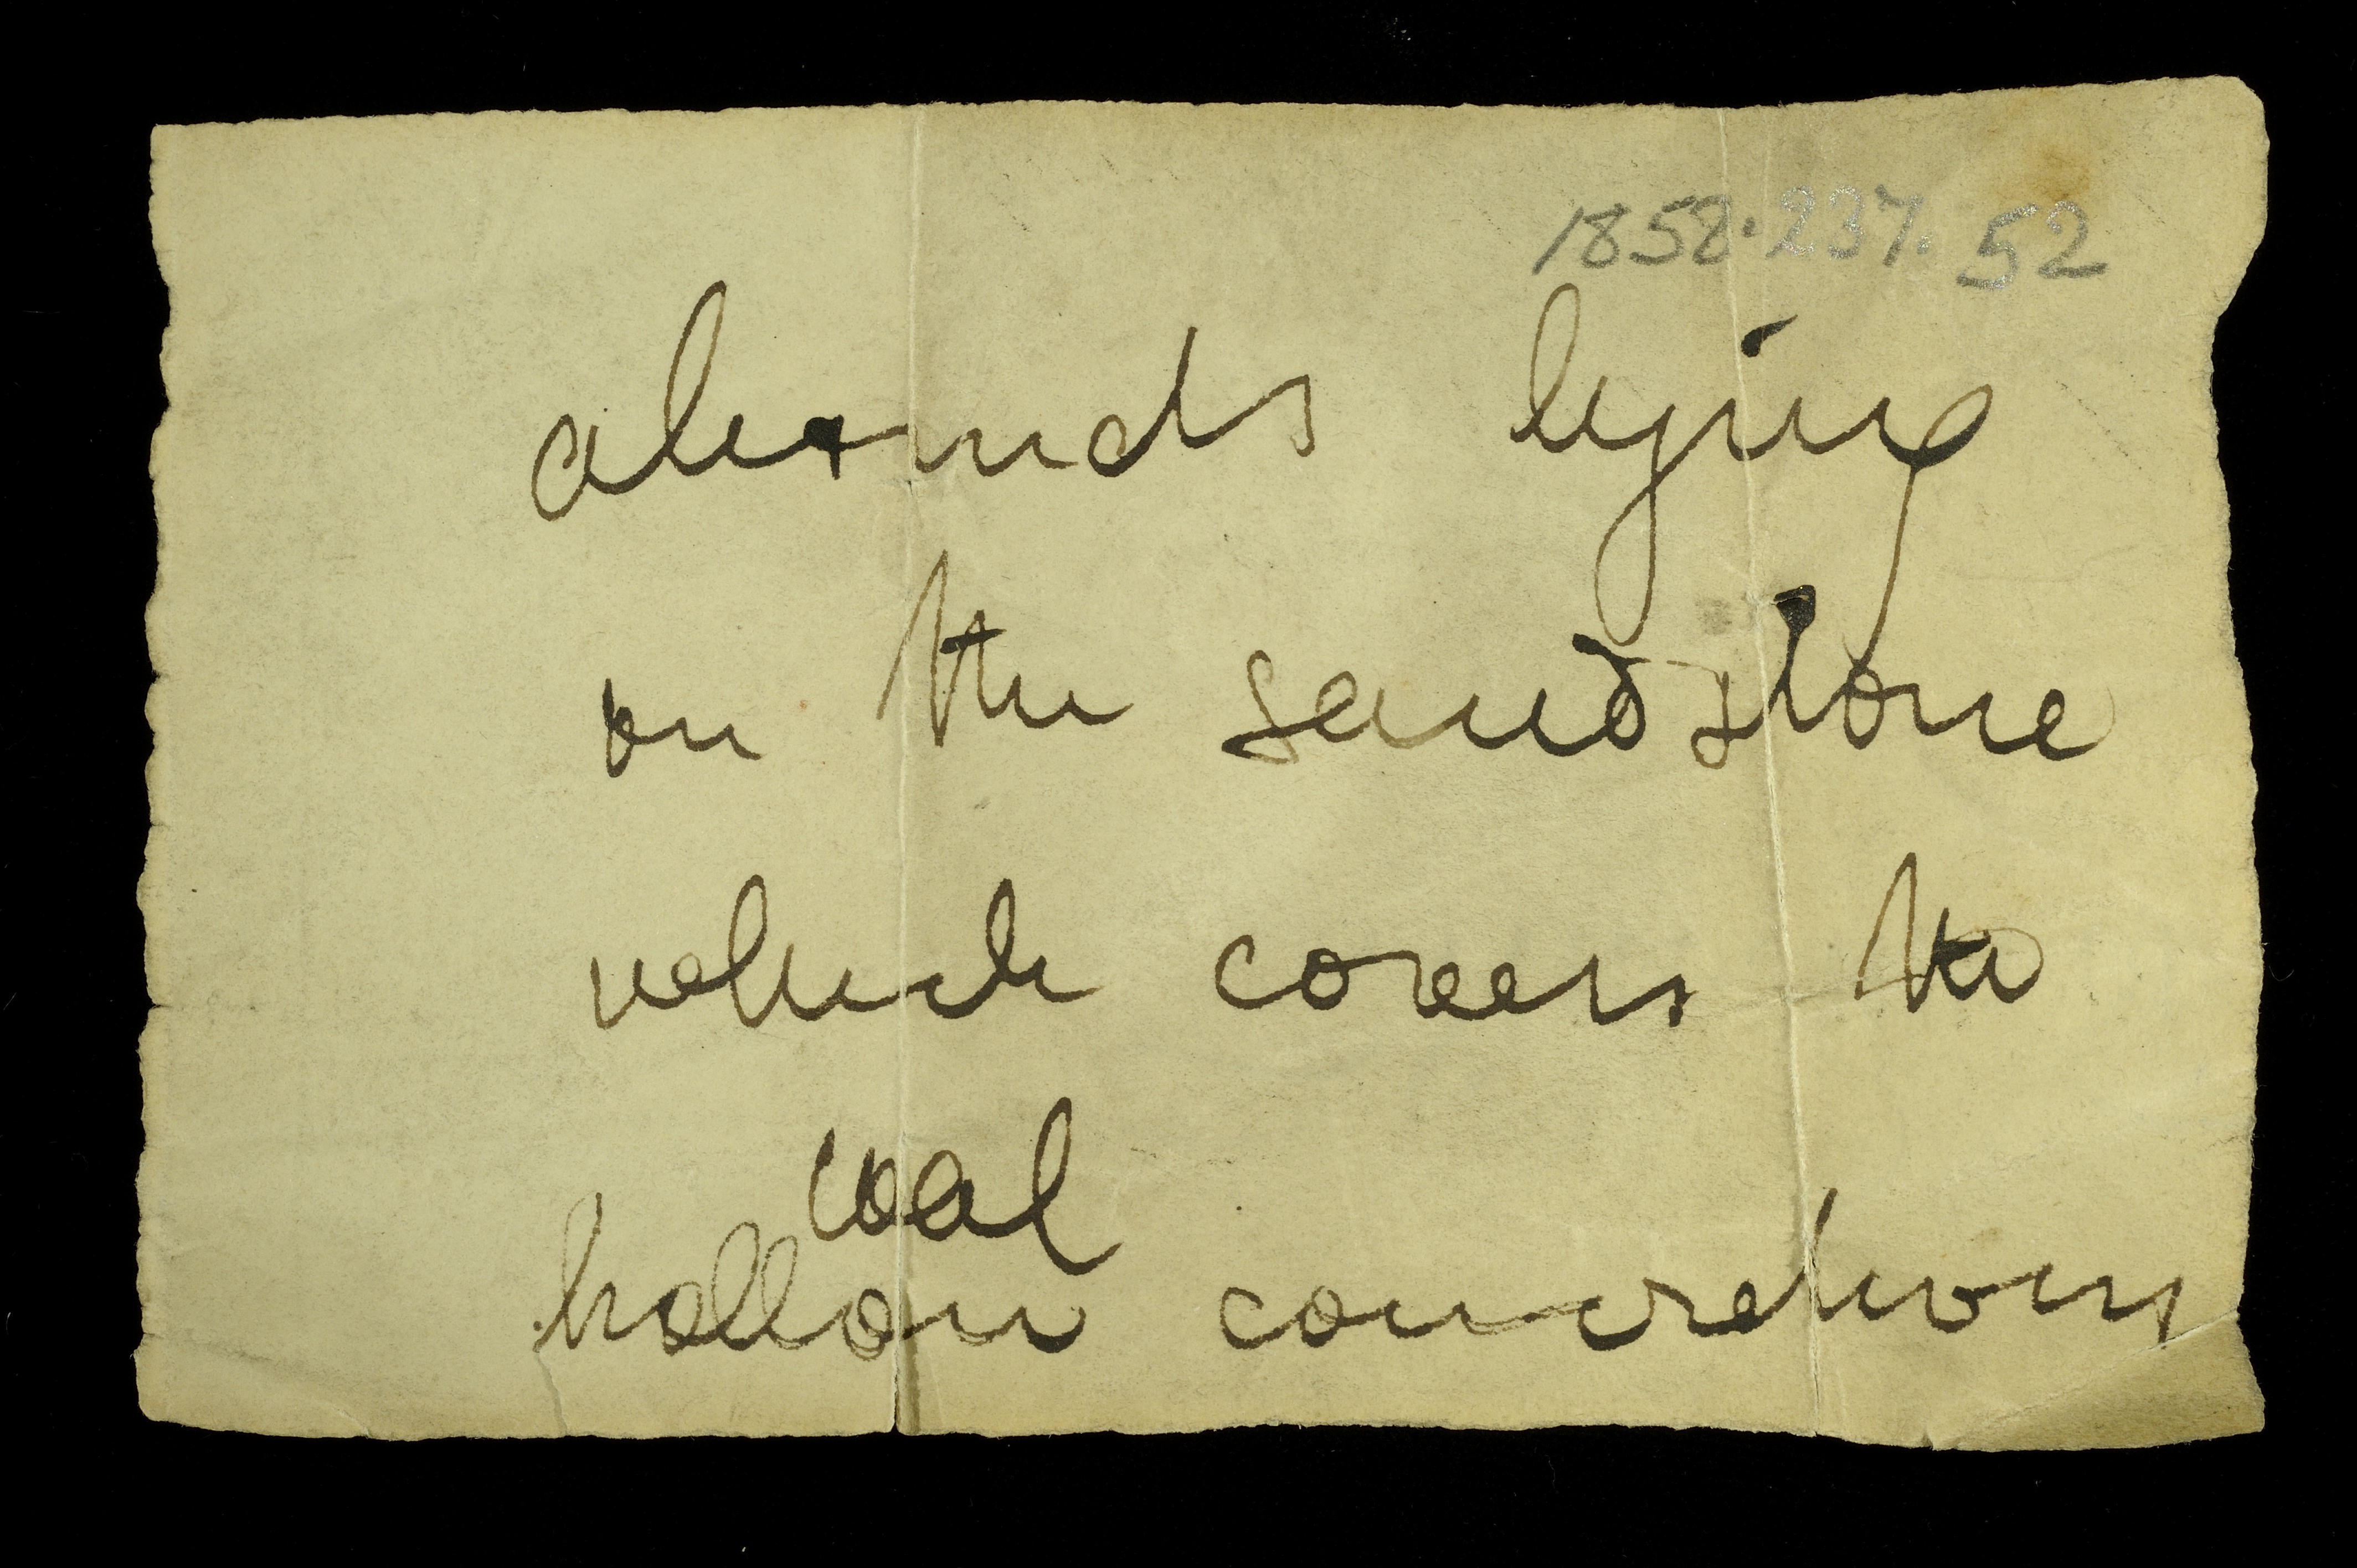 Livingstone’s note written in the field for the hollowed rock: ‘Abounds lying on the sandstone which covers the coal, hollow concretions.’